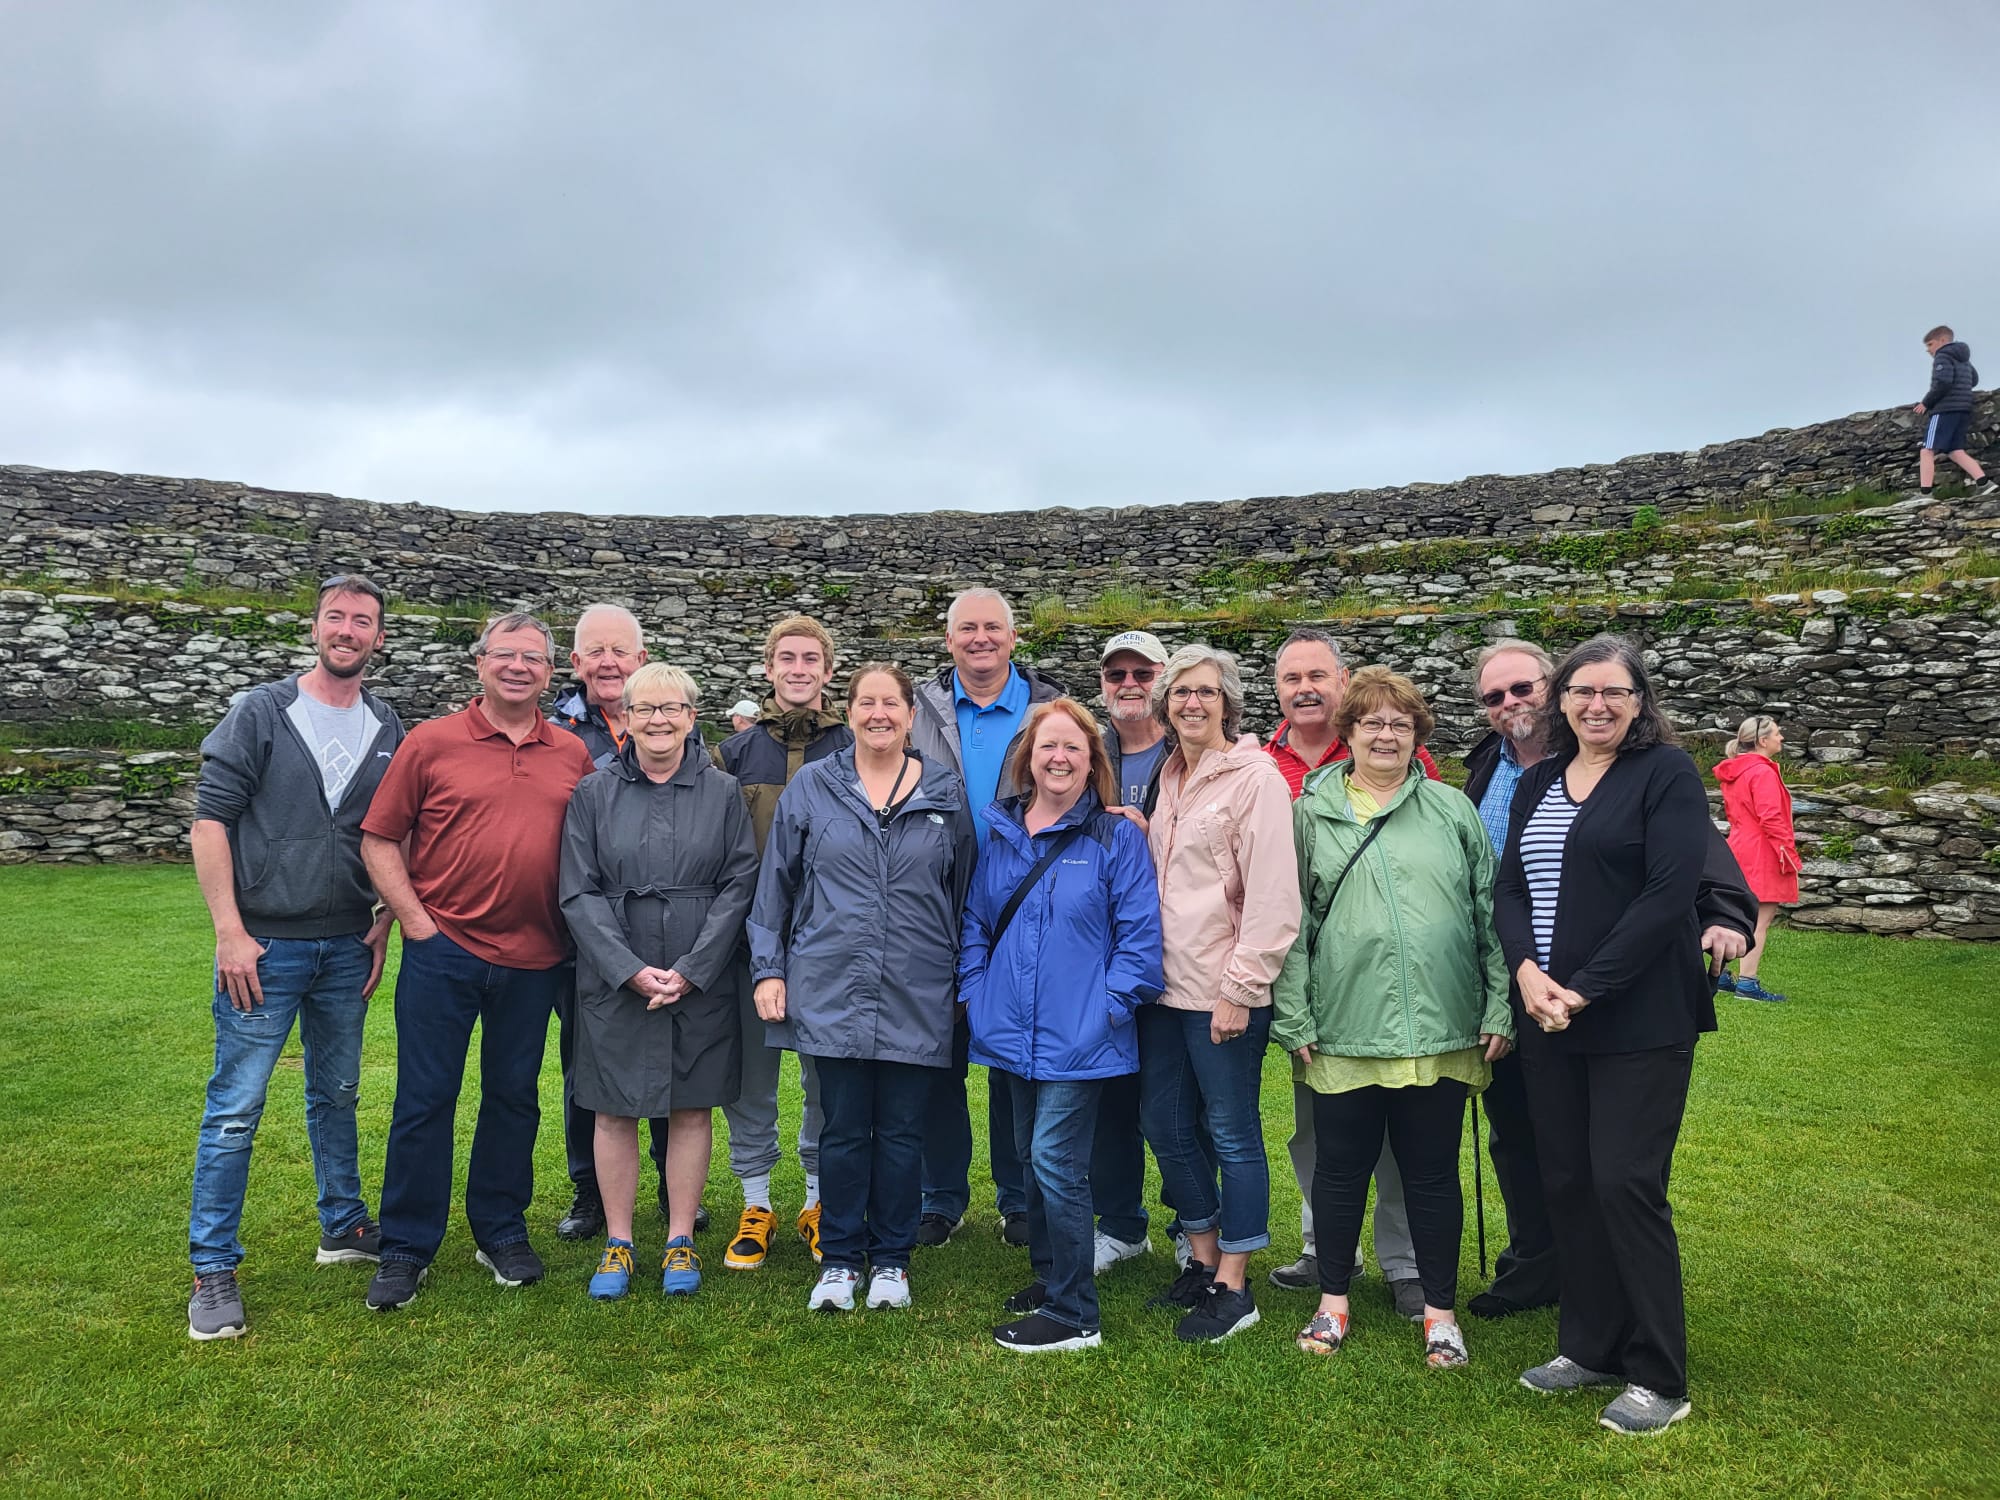 A small group of people posing for a photo in front of historic stone ruins on a cloudy day.